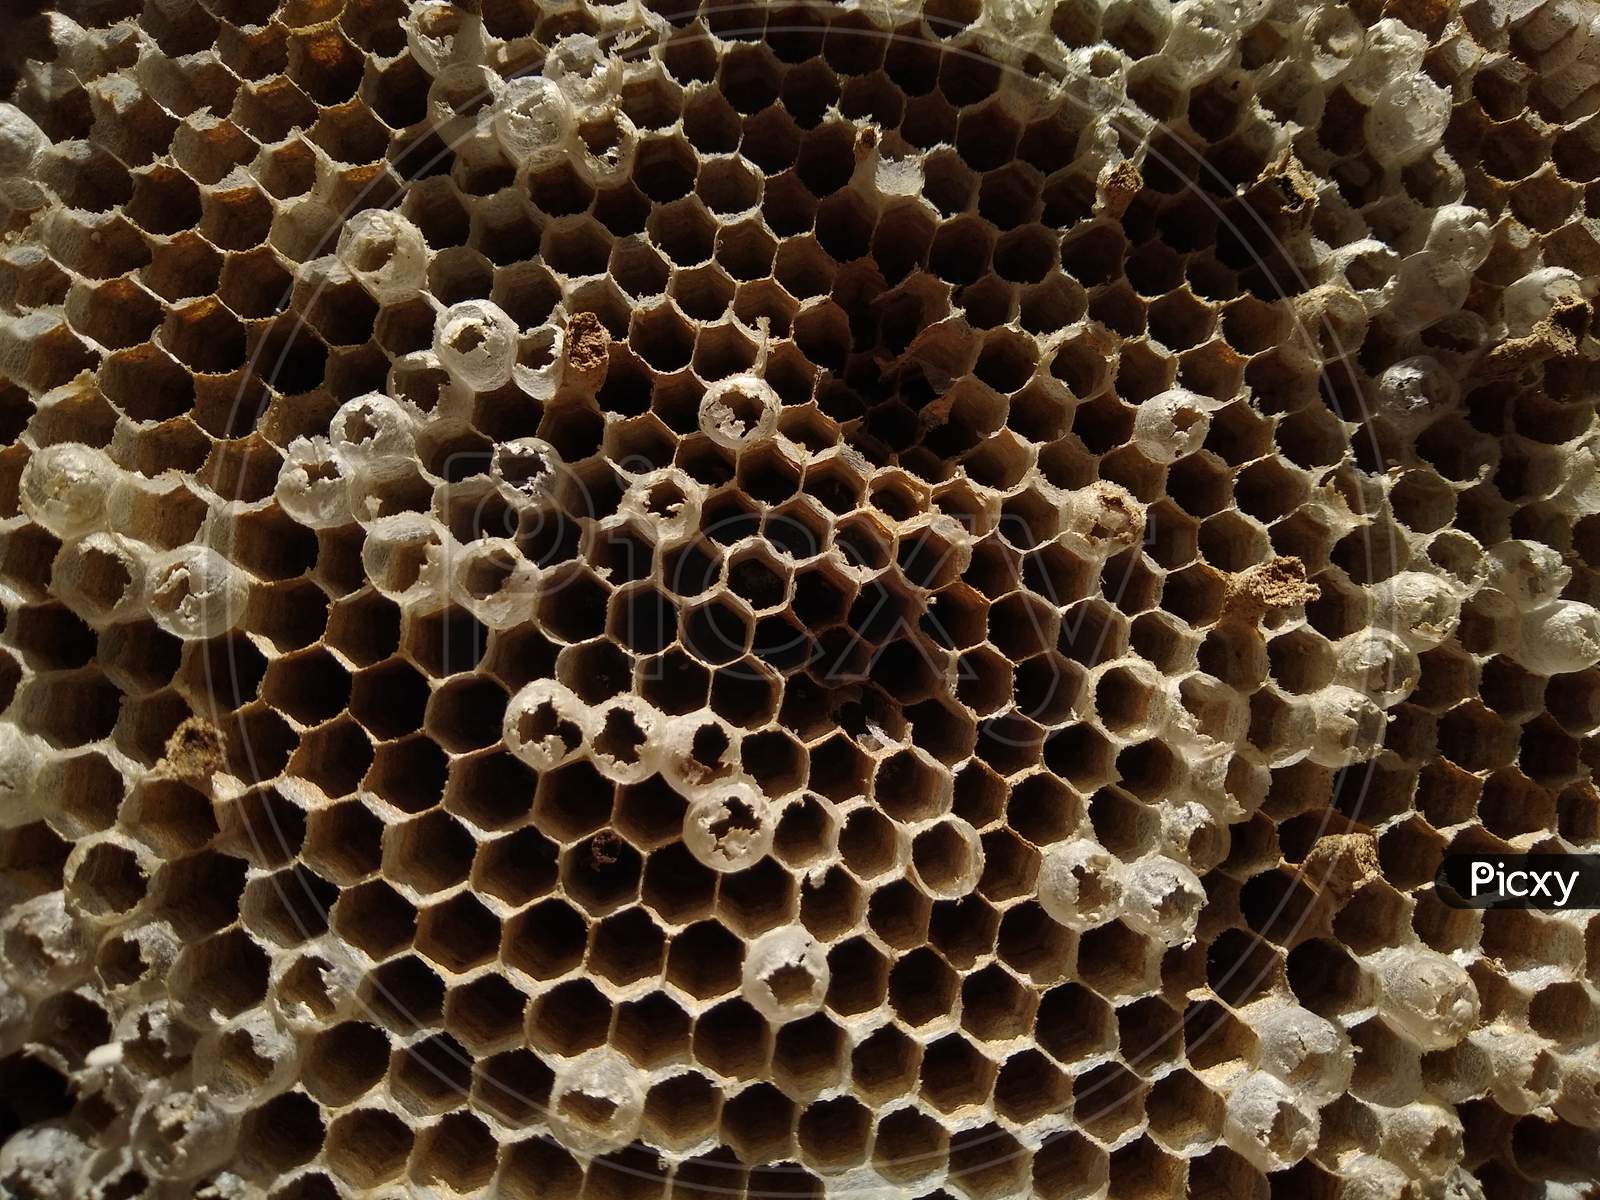 Honey comb, close-up view of the beehive